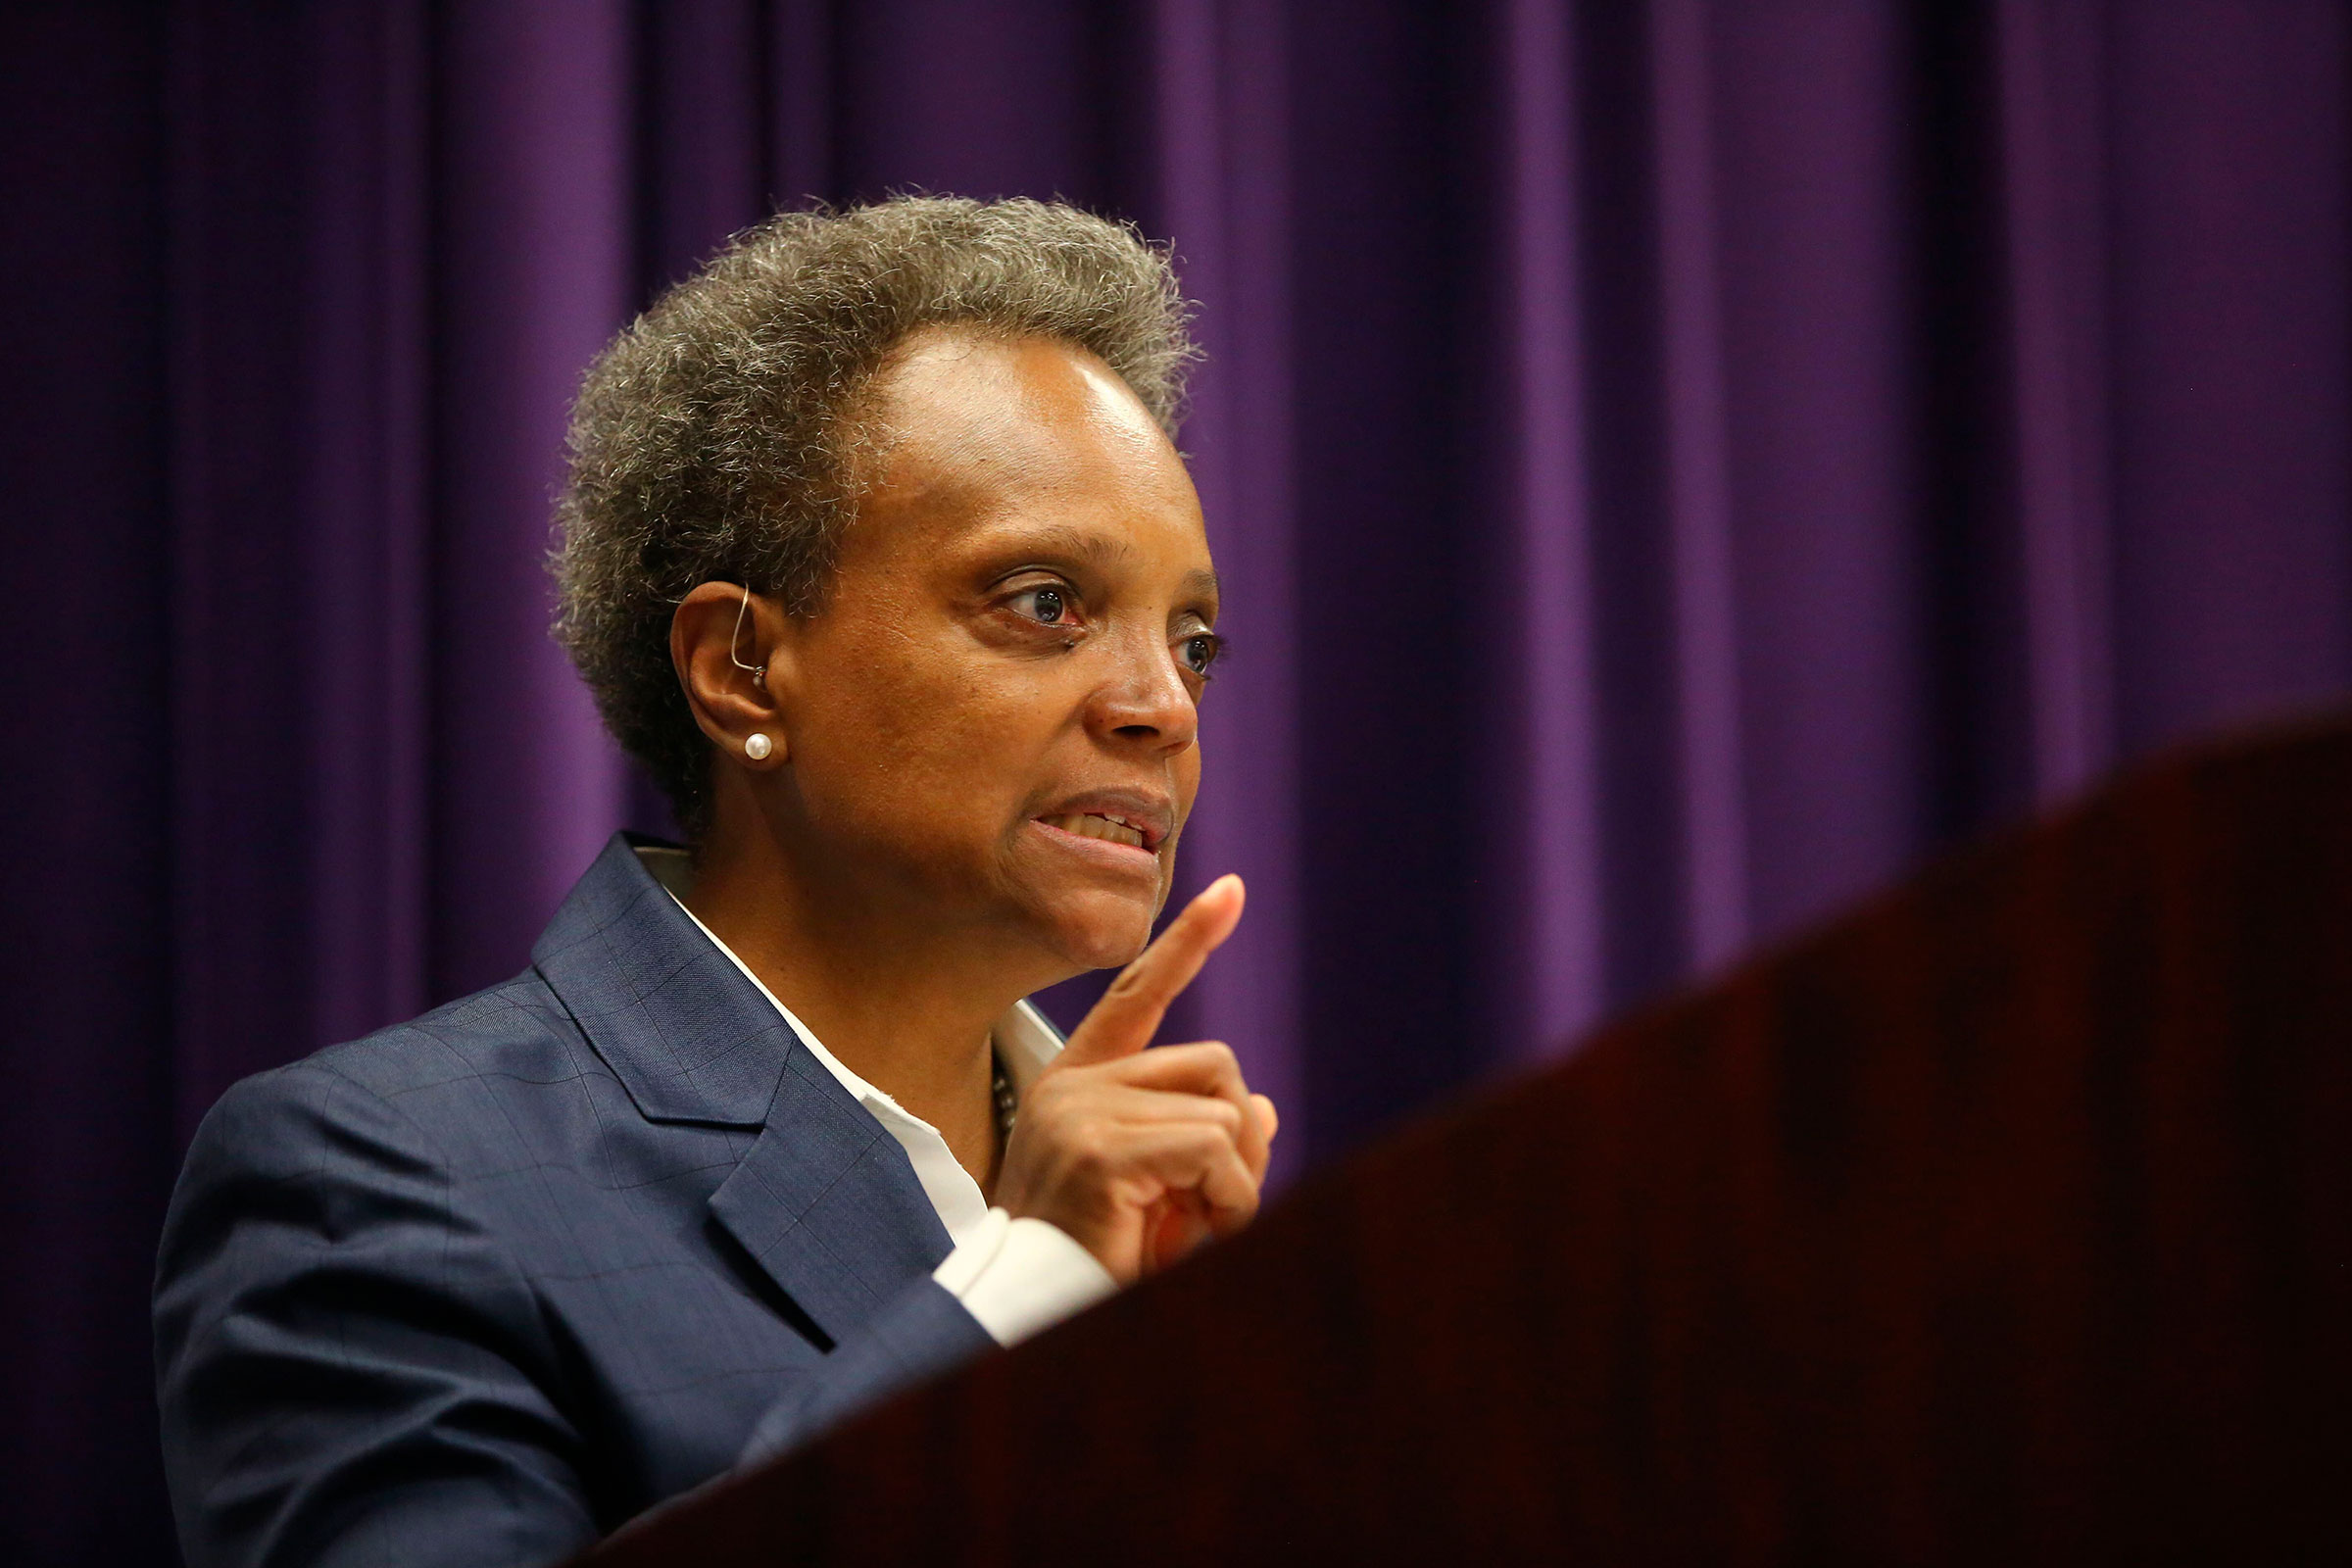 Mayor Lori Lightfoot speaks at a news conference Monday, Aug. 10, 2020, at Chicago Police headquarters to address looting that occurred overnight in Chicago. (Anthony Vazquez—Chicago Sun-Times/AP)